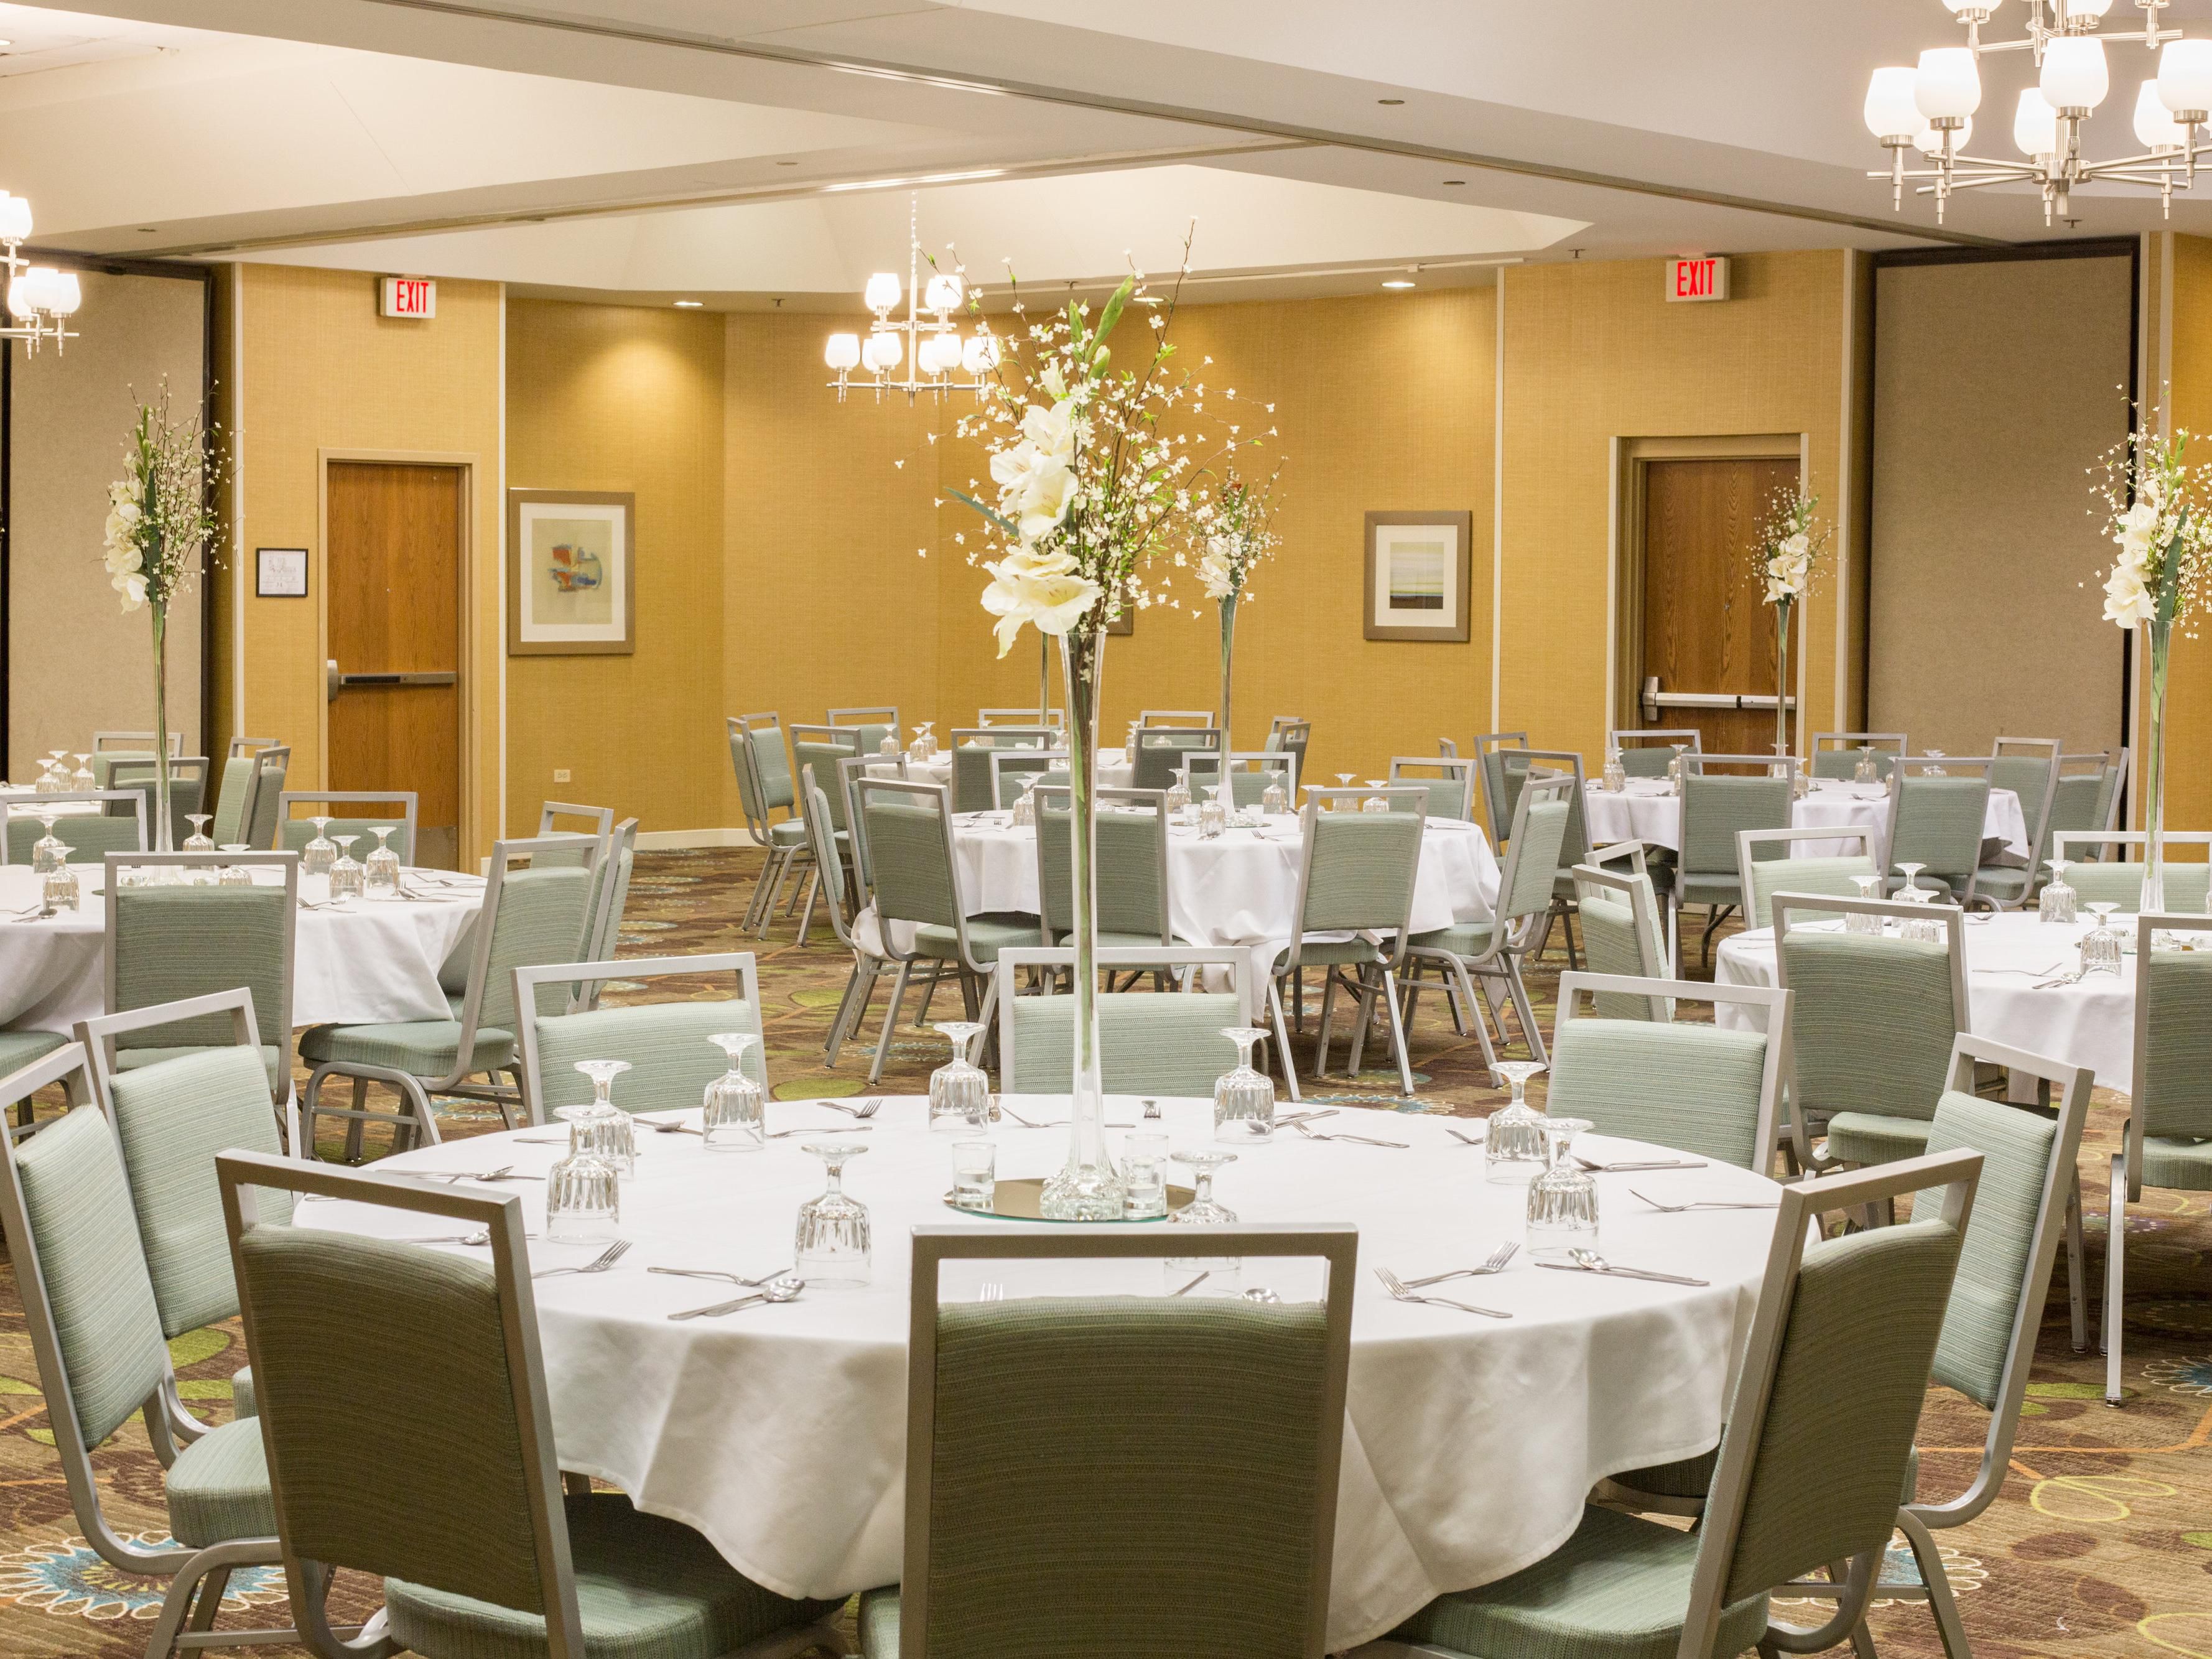 Your one-stop meeting & event destination! With 3,773 square feet of flexible ballroom and breakout space, an executive boardroom, onsite AV rentals and a full-service sales & catering team – Look No Further! Corporate meetings, reunions, receptions, job fairs, recognition luncheons and more – they are all our specialty!